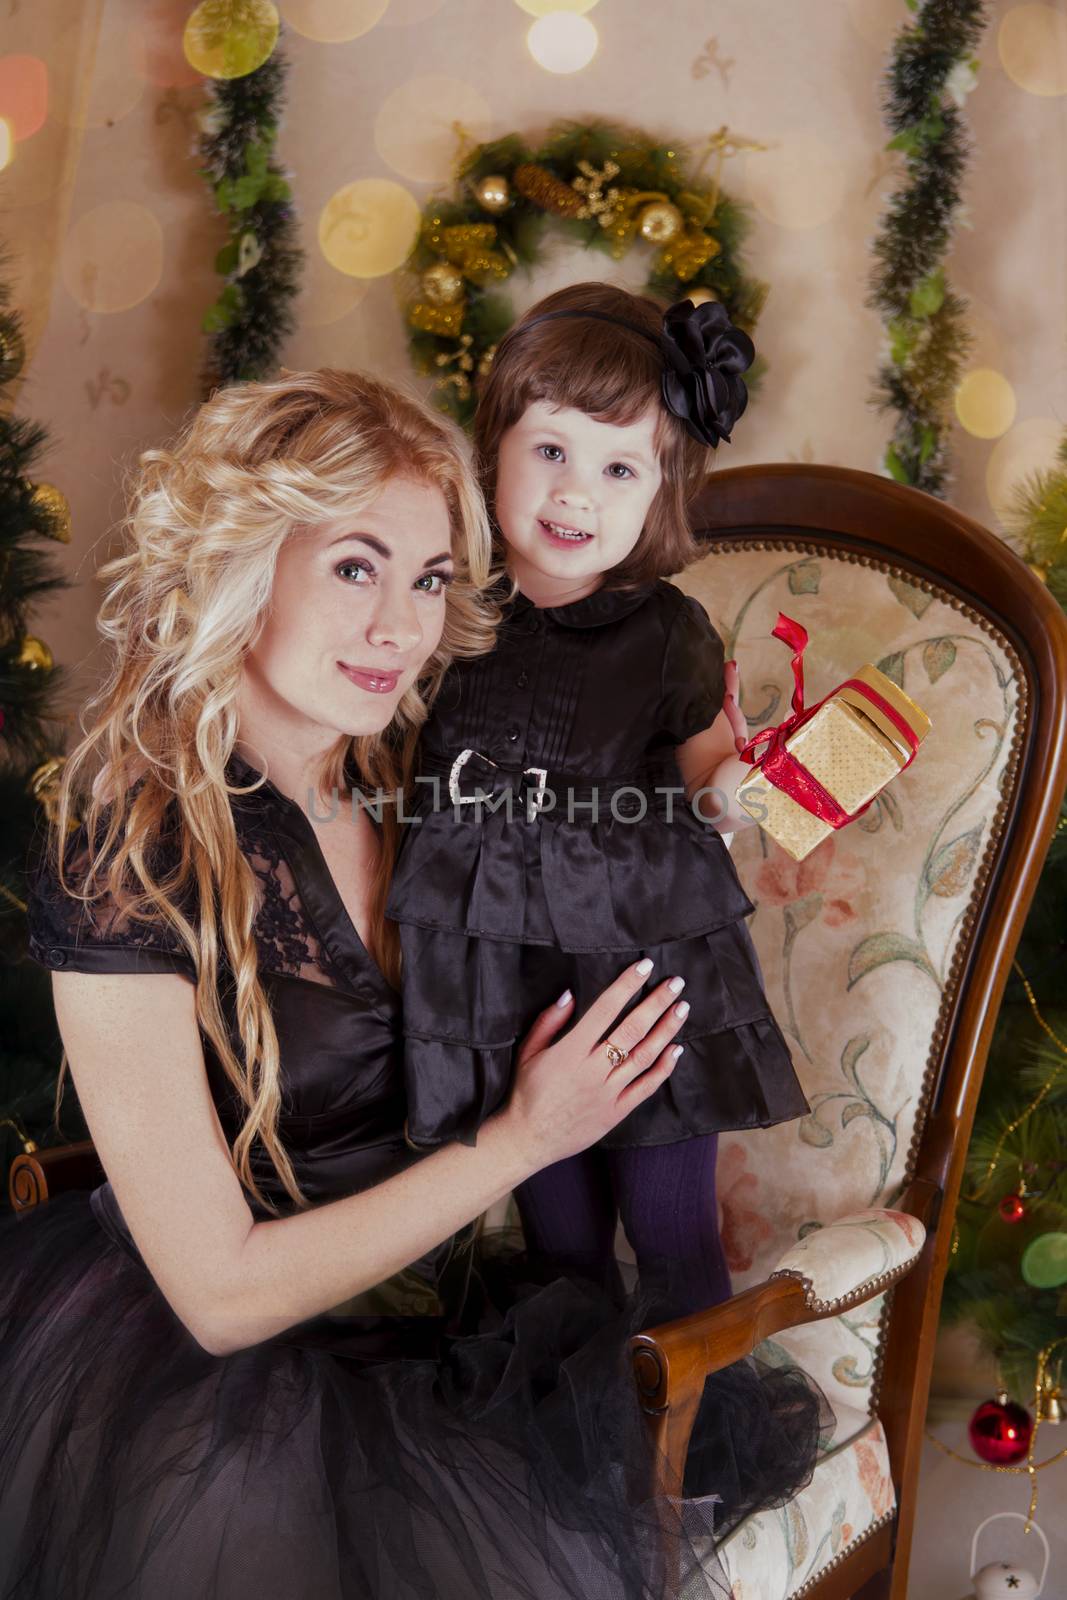 Mother and daughter under Christmas tree by Angel_a